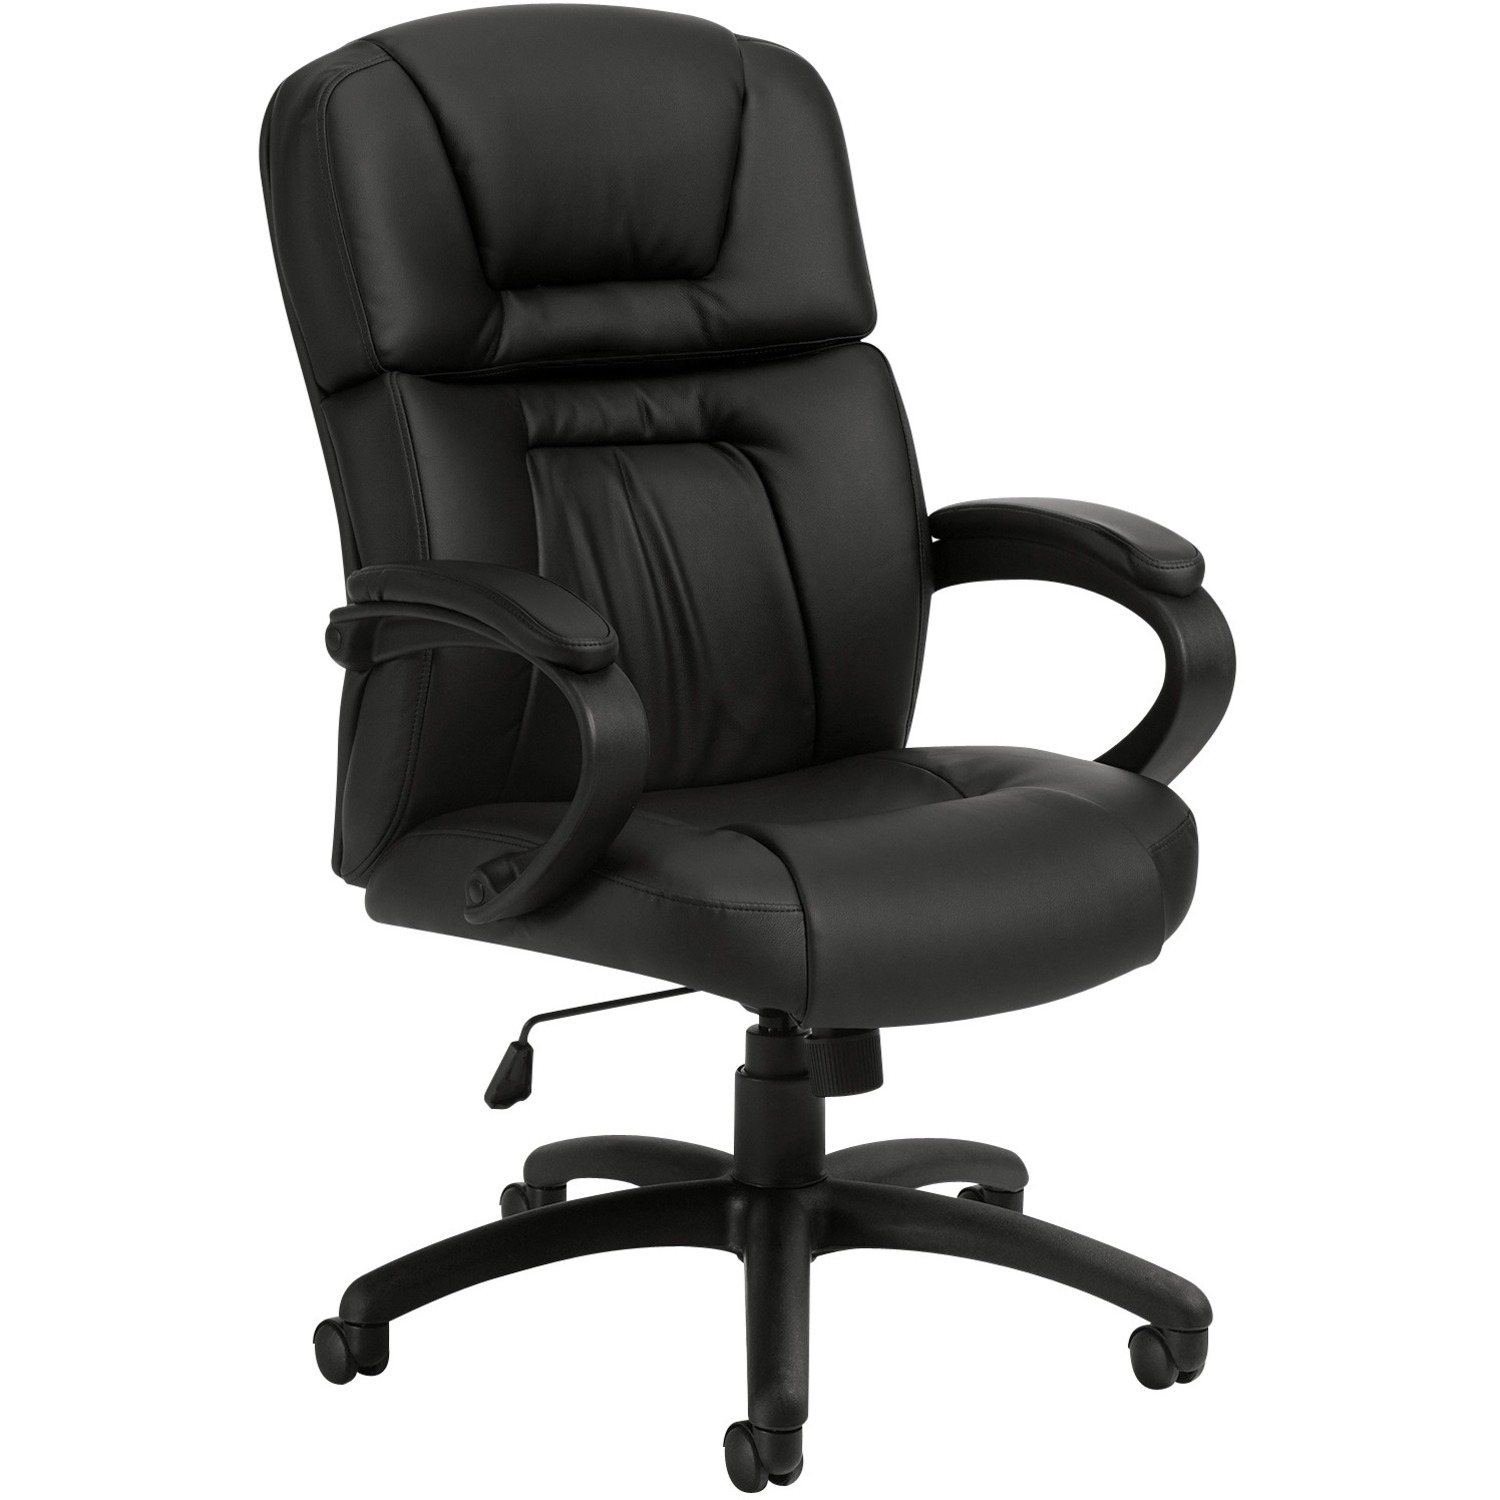 Offices To Go Pacific Executive Leather Chair with High Back Tilter - Each